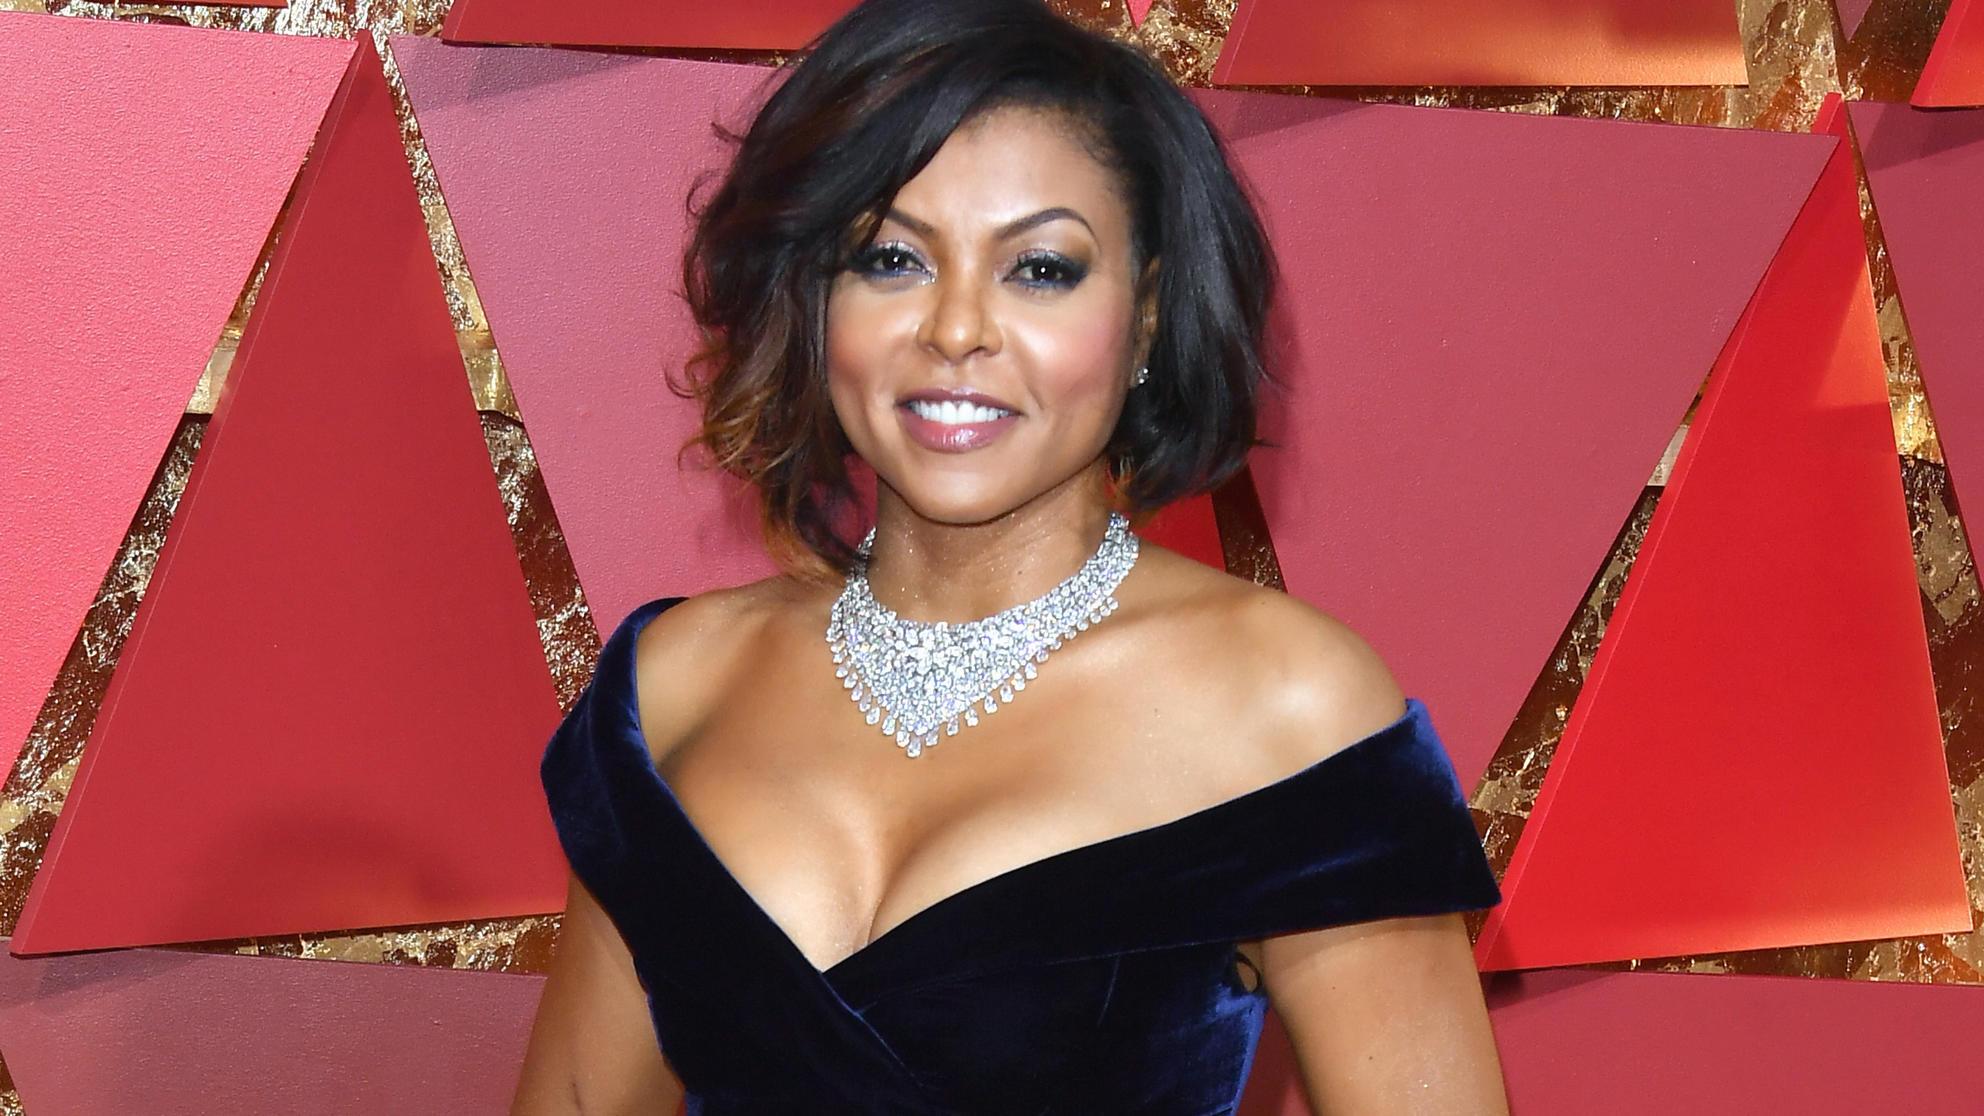 Upper Body Exercises To Steal From Taraji P. Henson's Workout